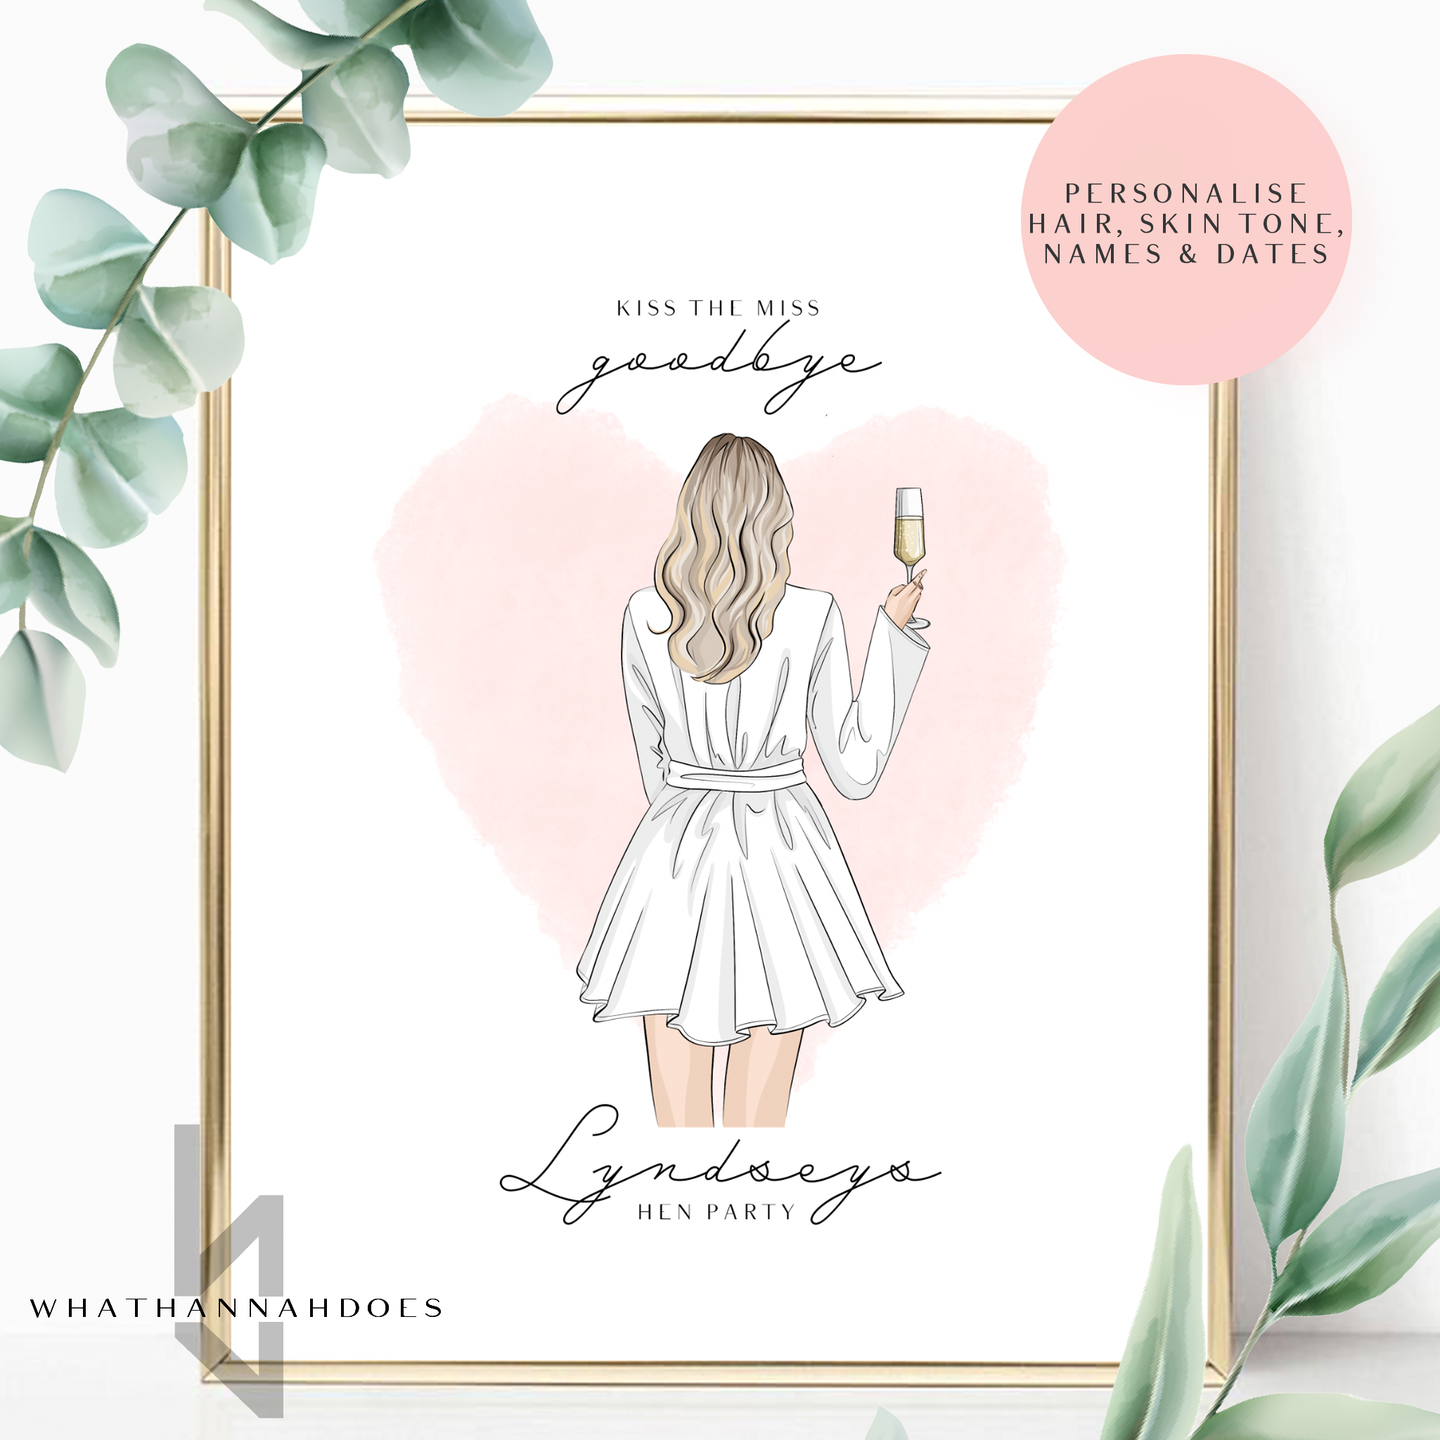 Kiss The Miss Goodbye Back Portrait Robe Line Up Drawing Personalised Print